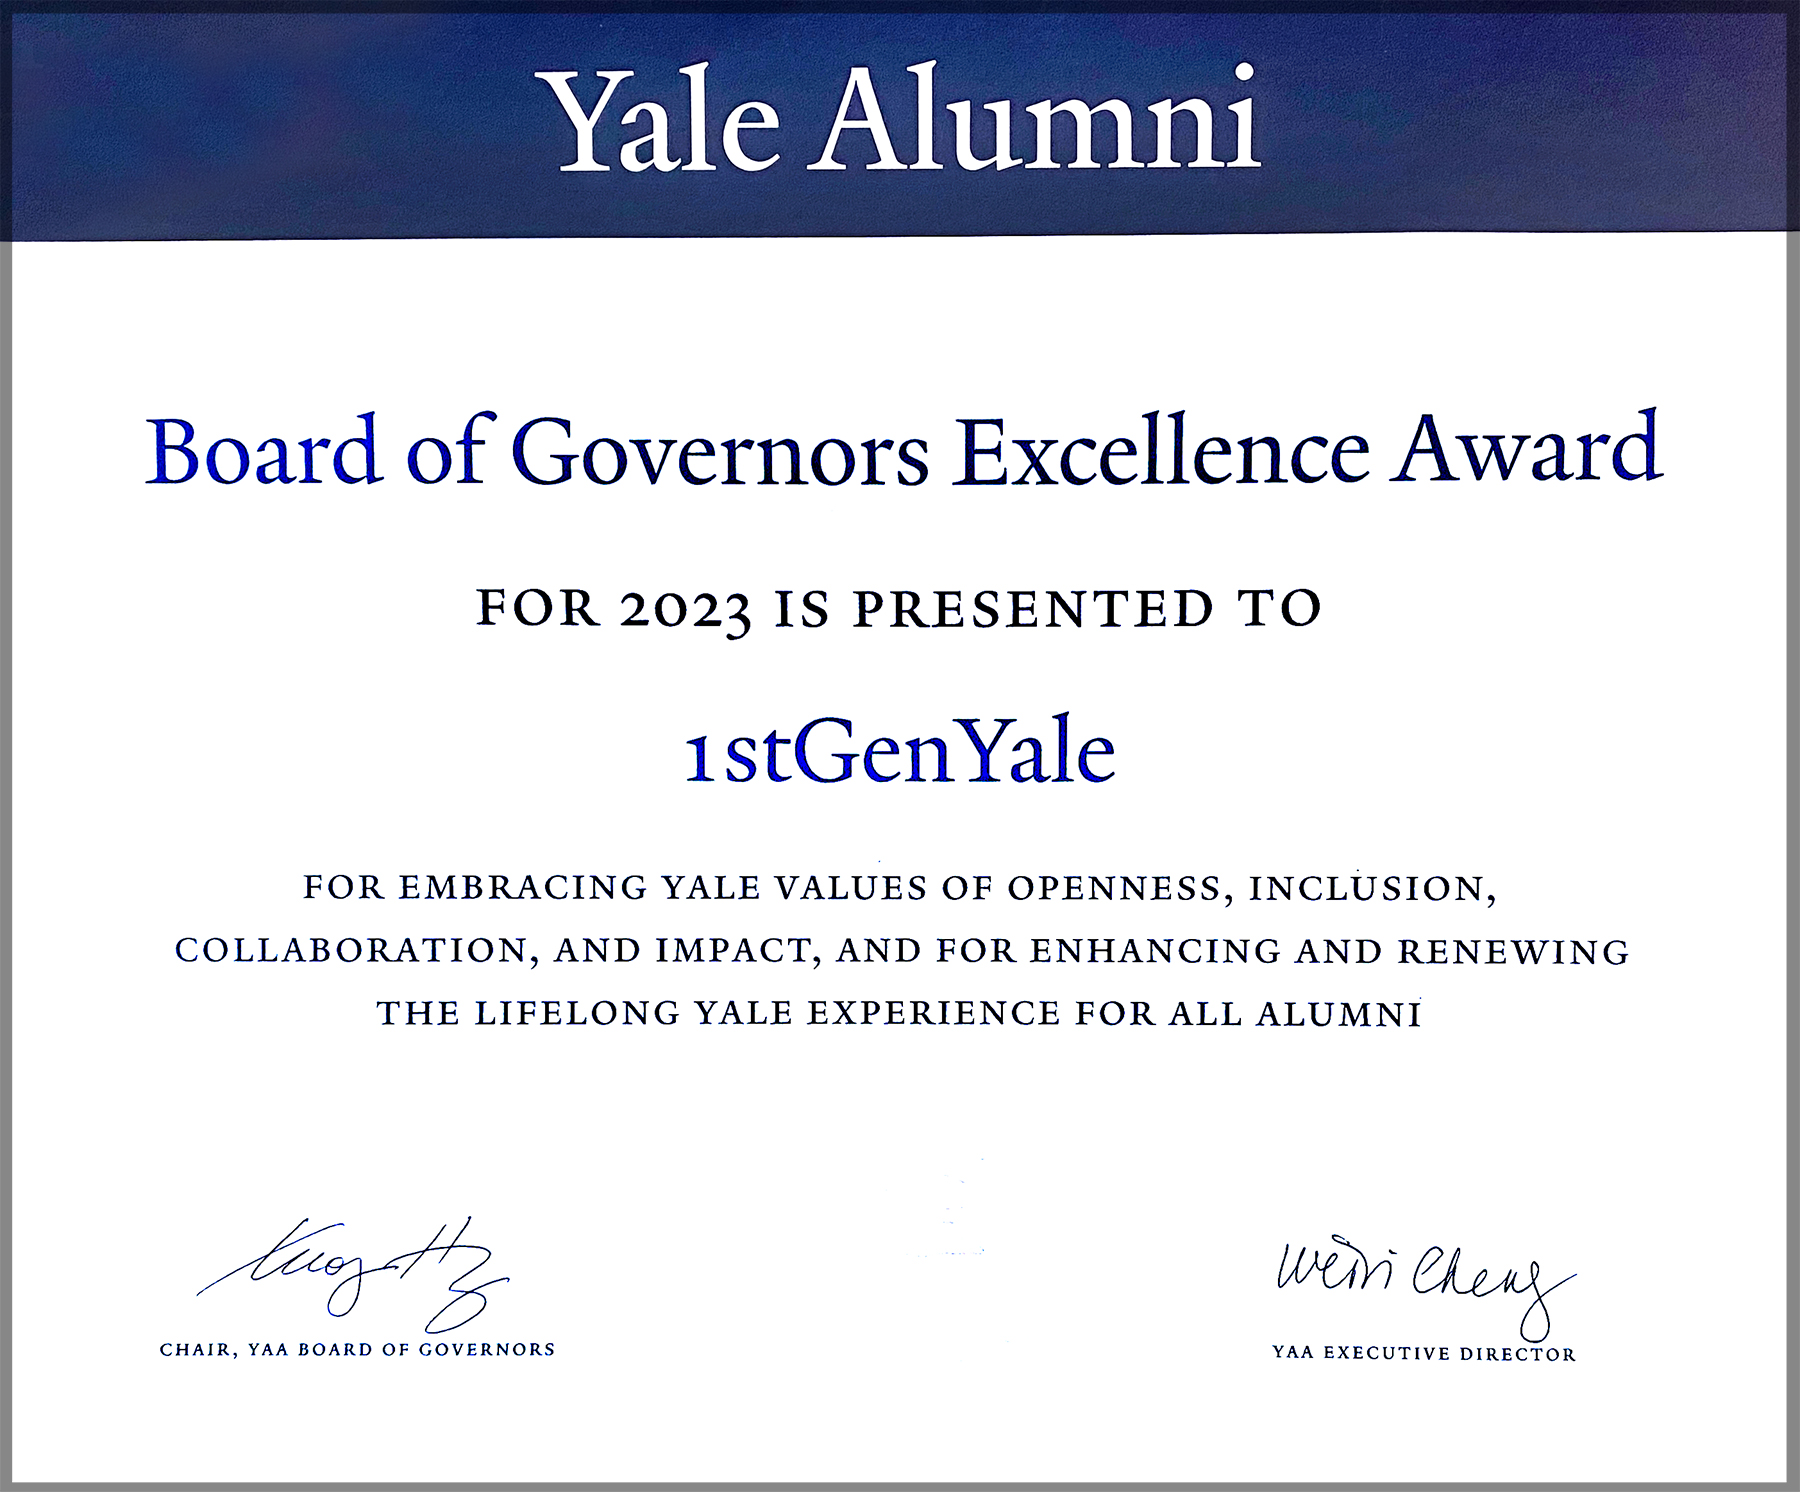 YAA Board of Governors Award for Excellence